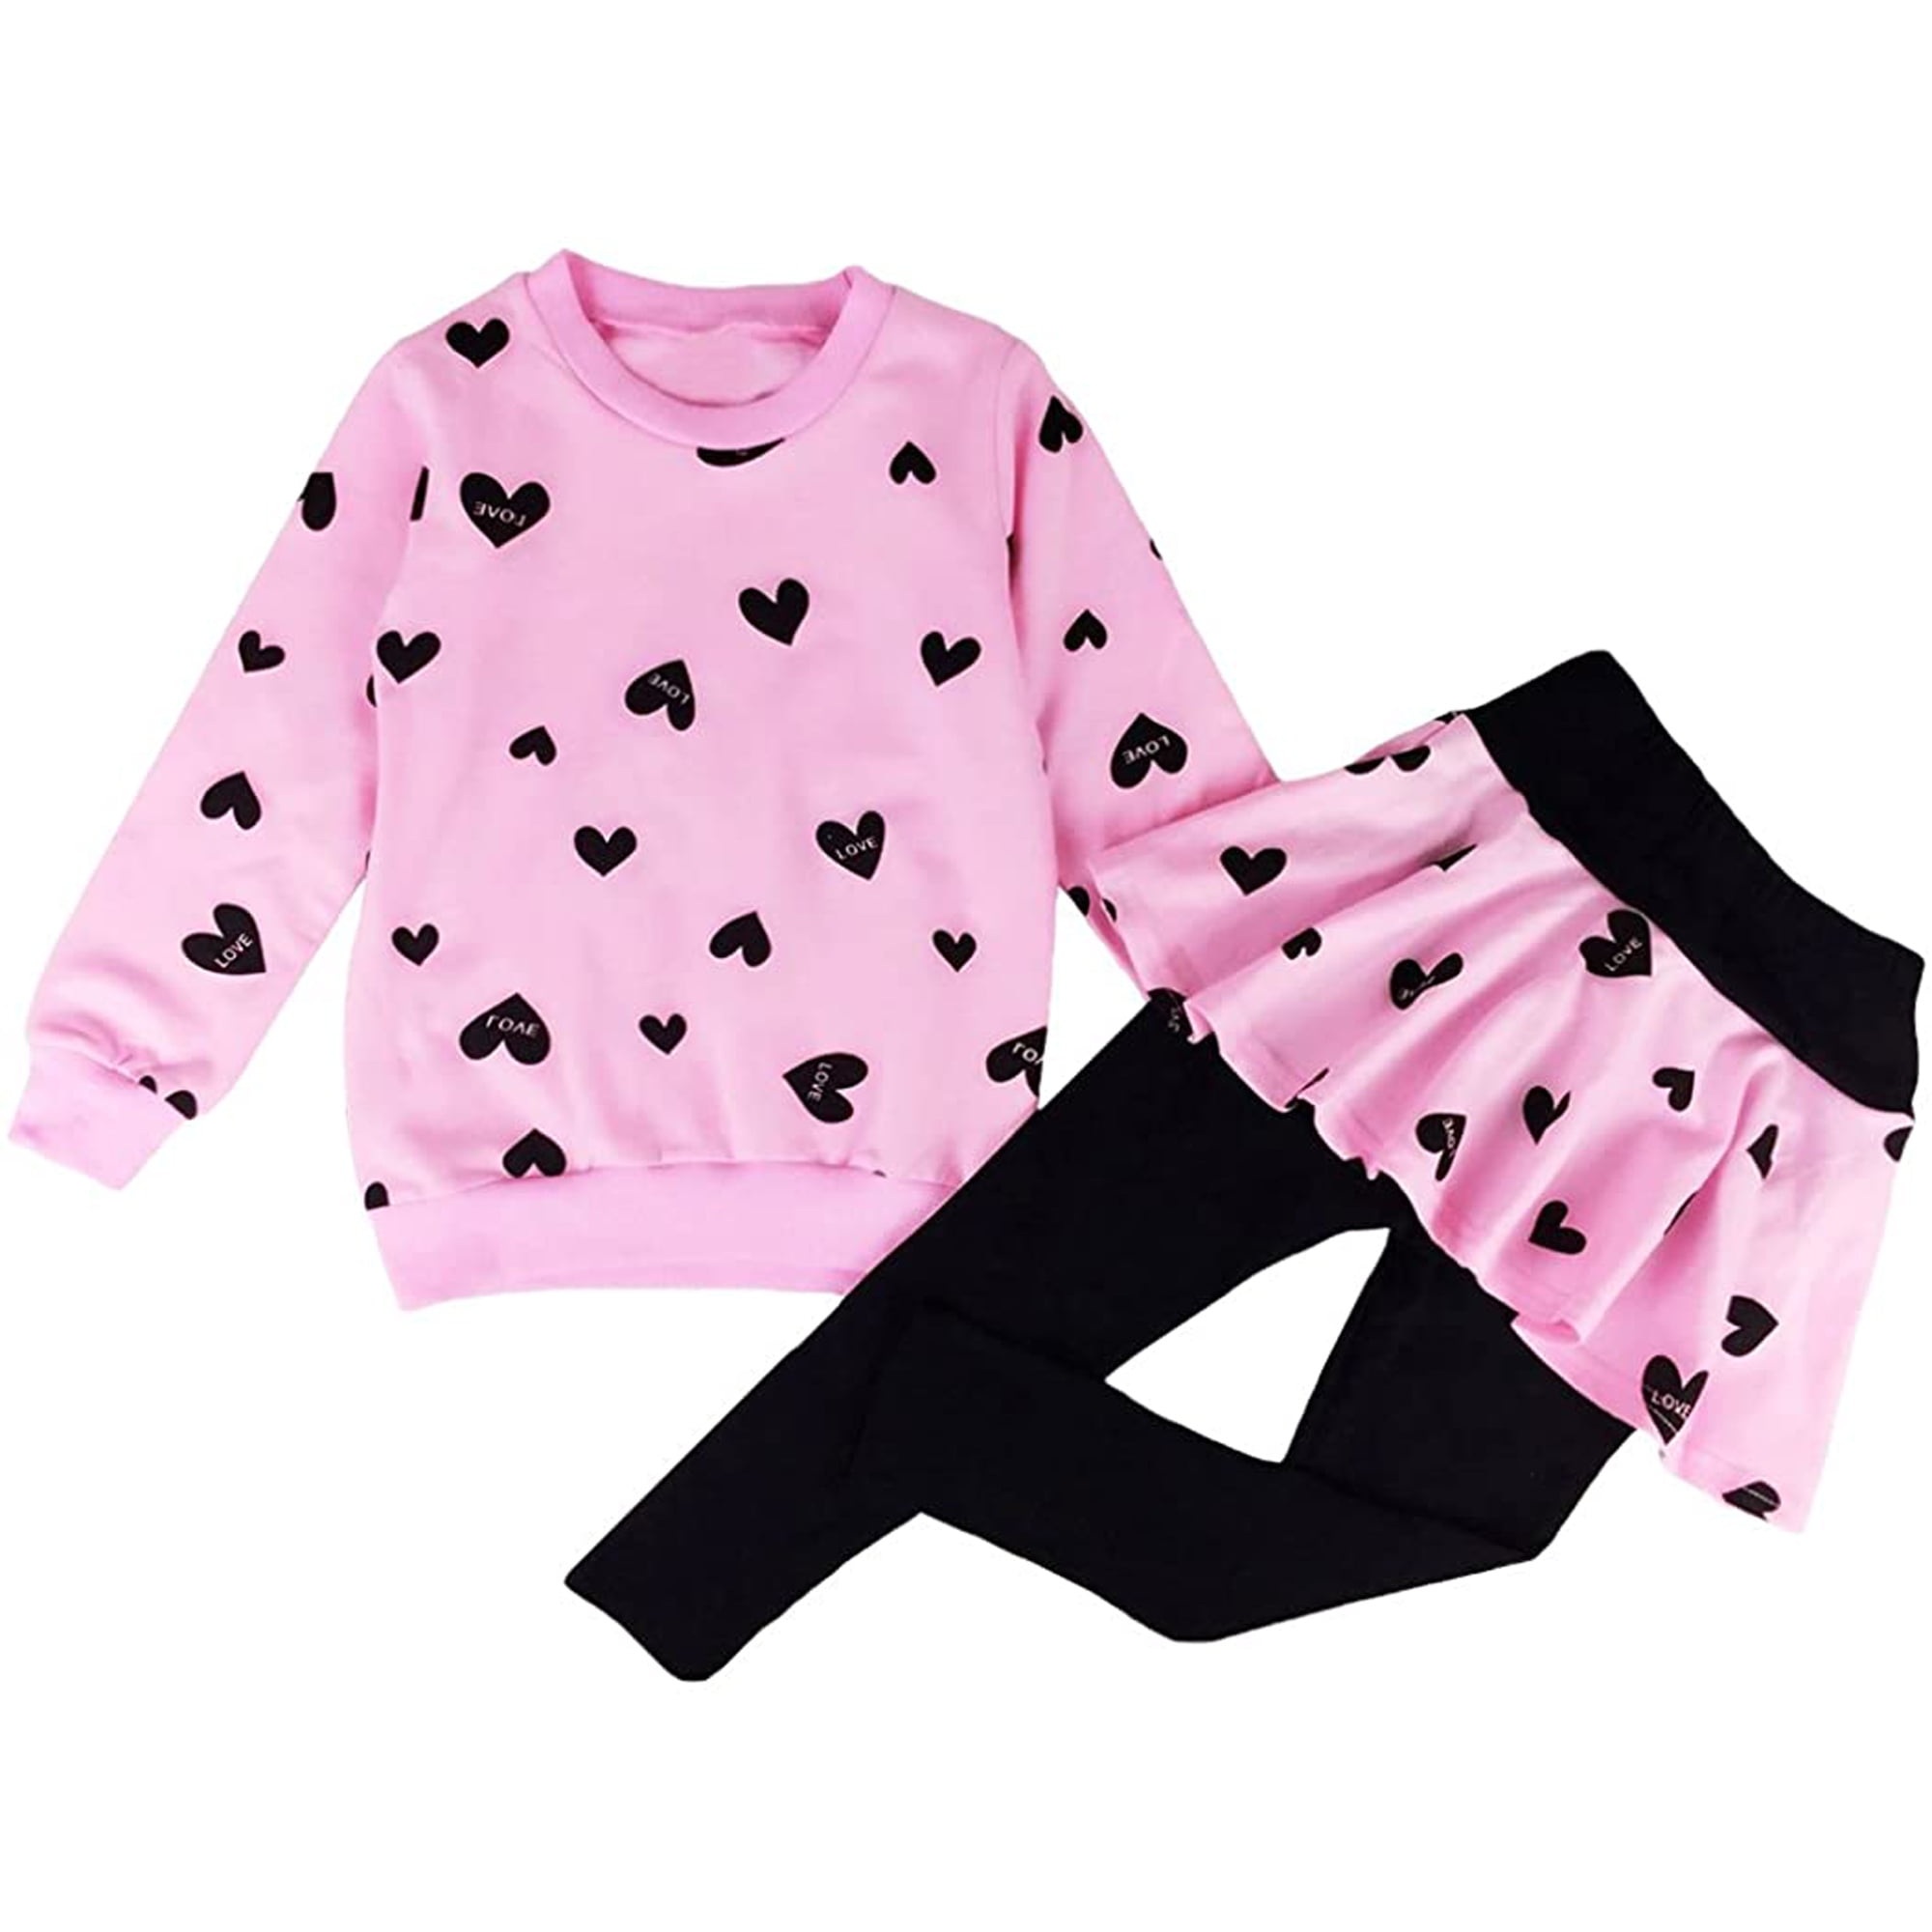 Little Hand Girl Clothing Set Outfit Sets Sweatshirt Top & Long